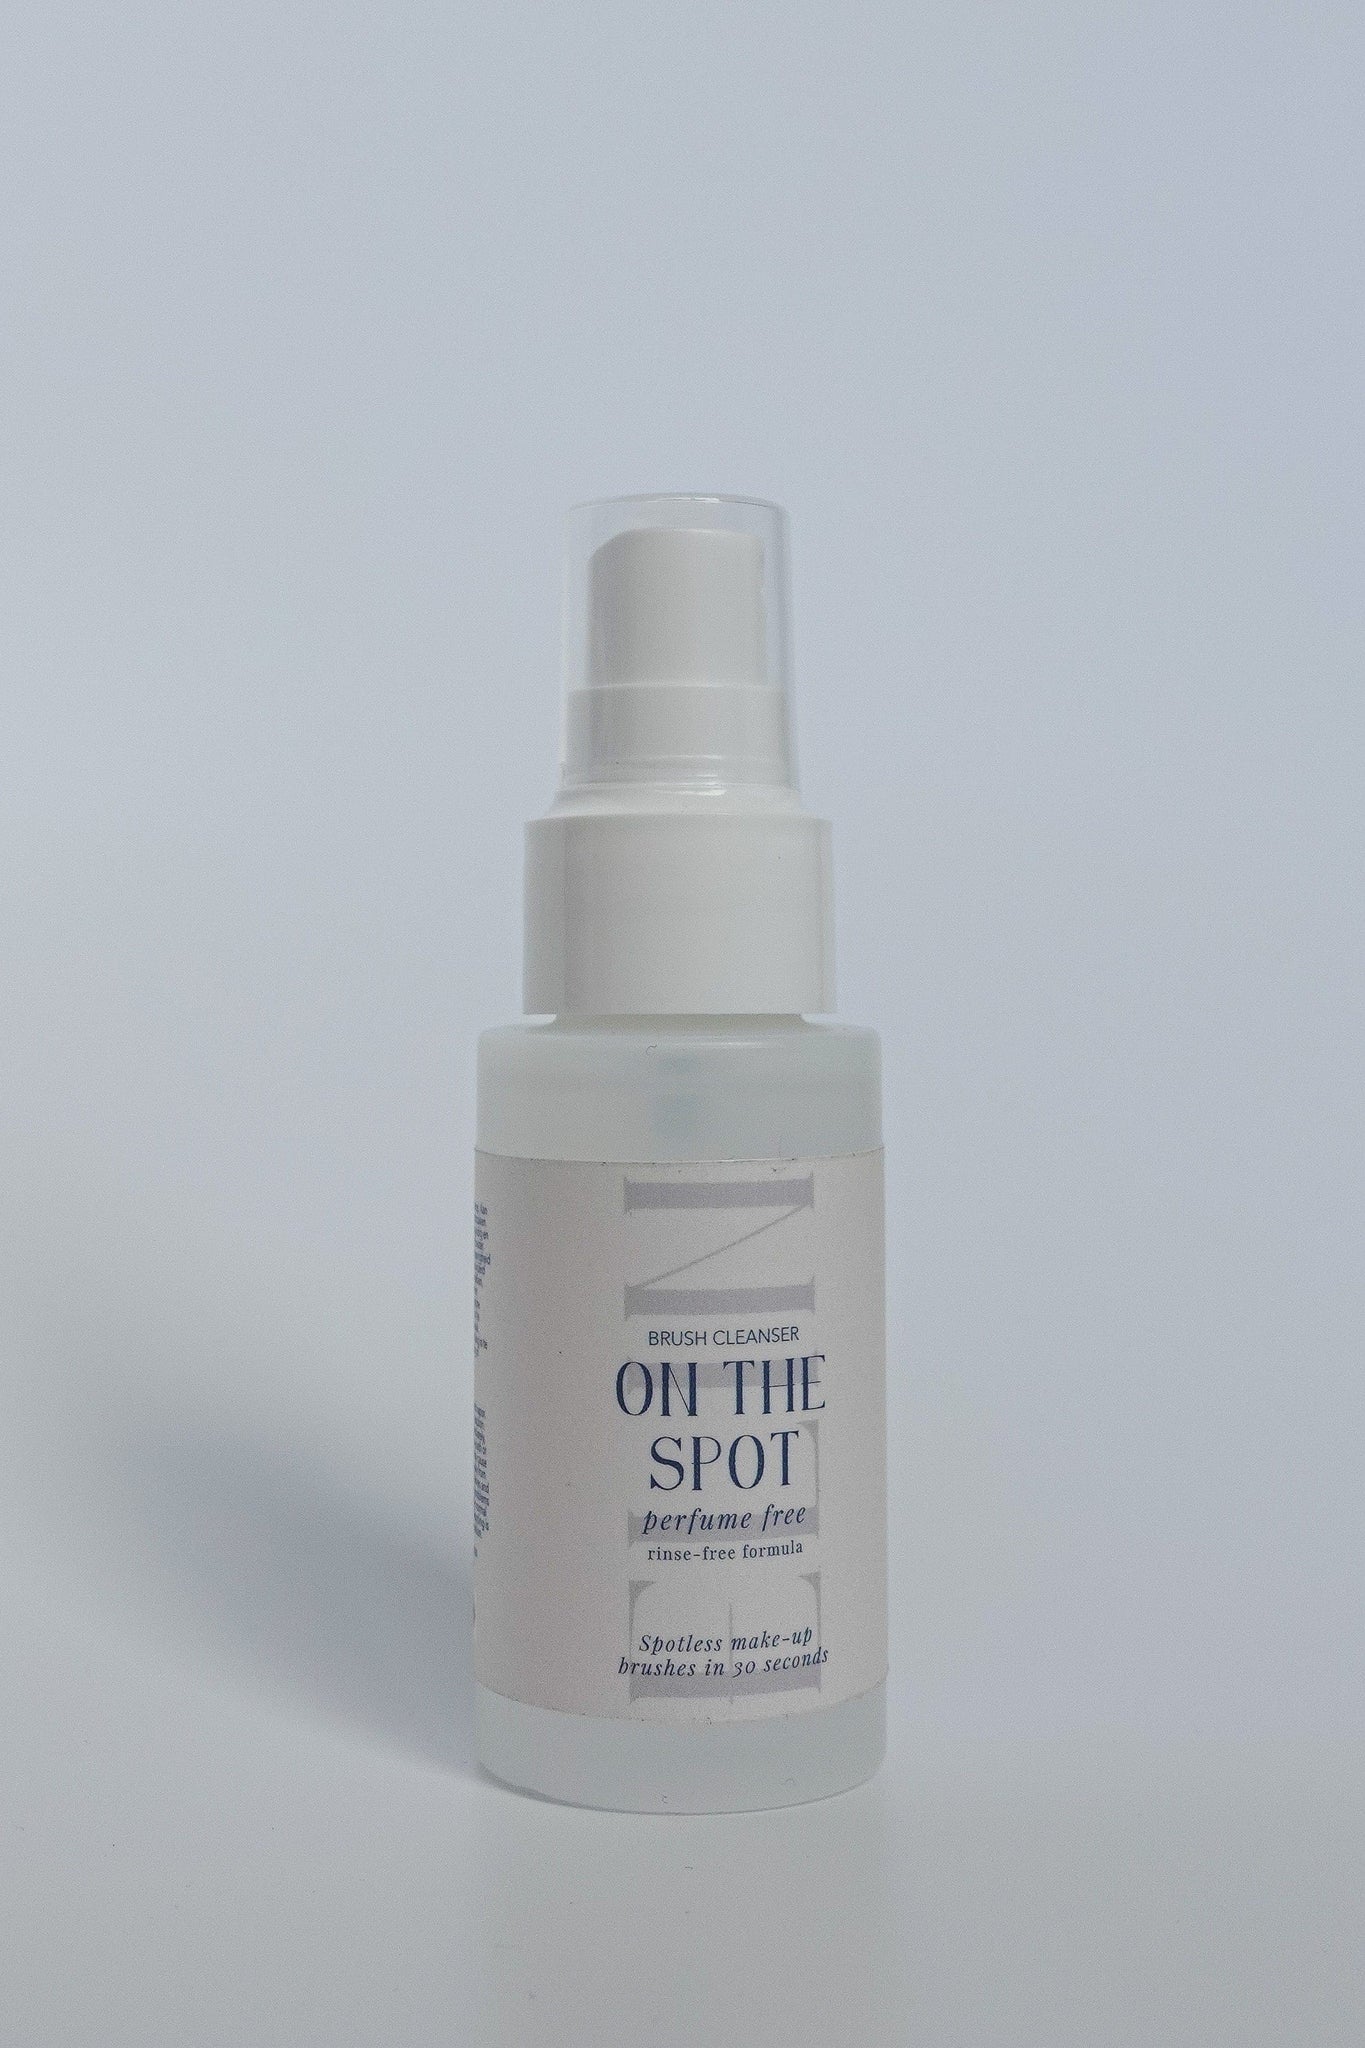 ELIN - On The Spot brush cleanser perfume-free - The Natural Beauty Club